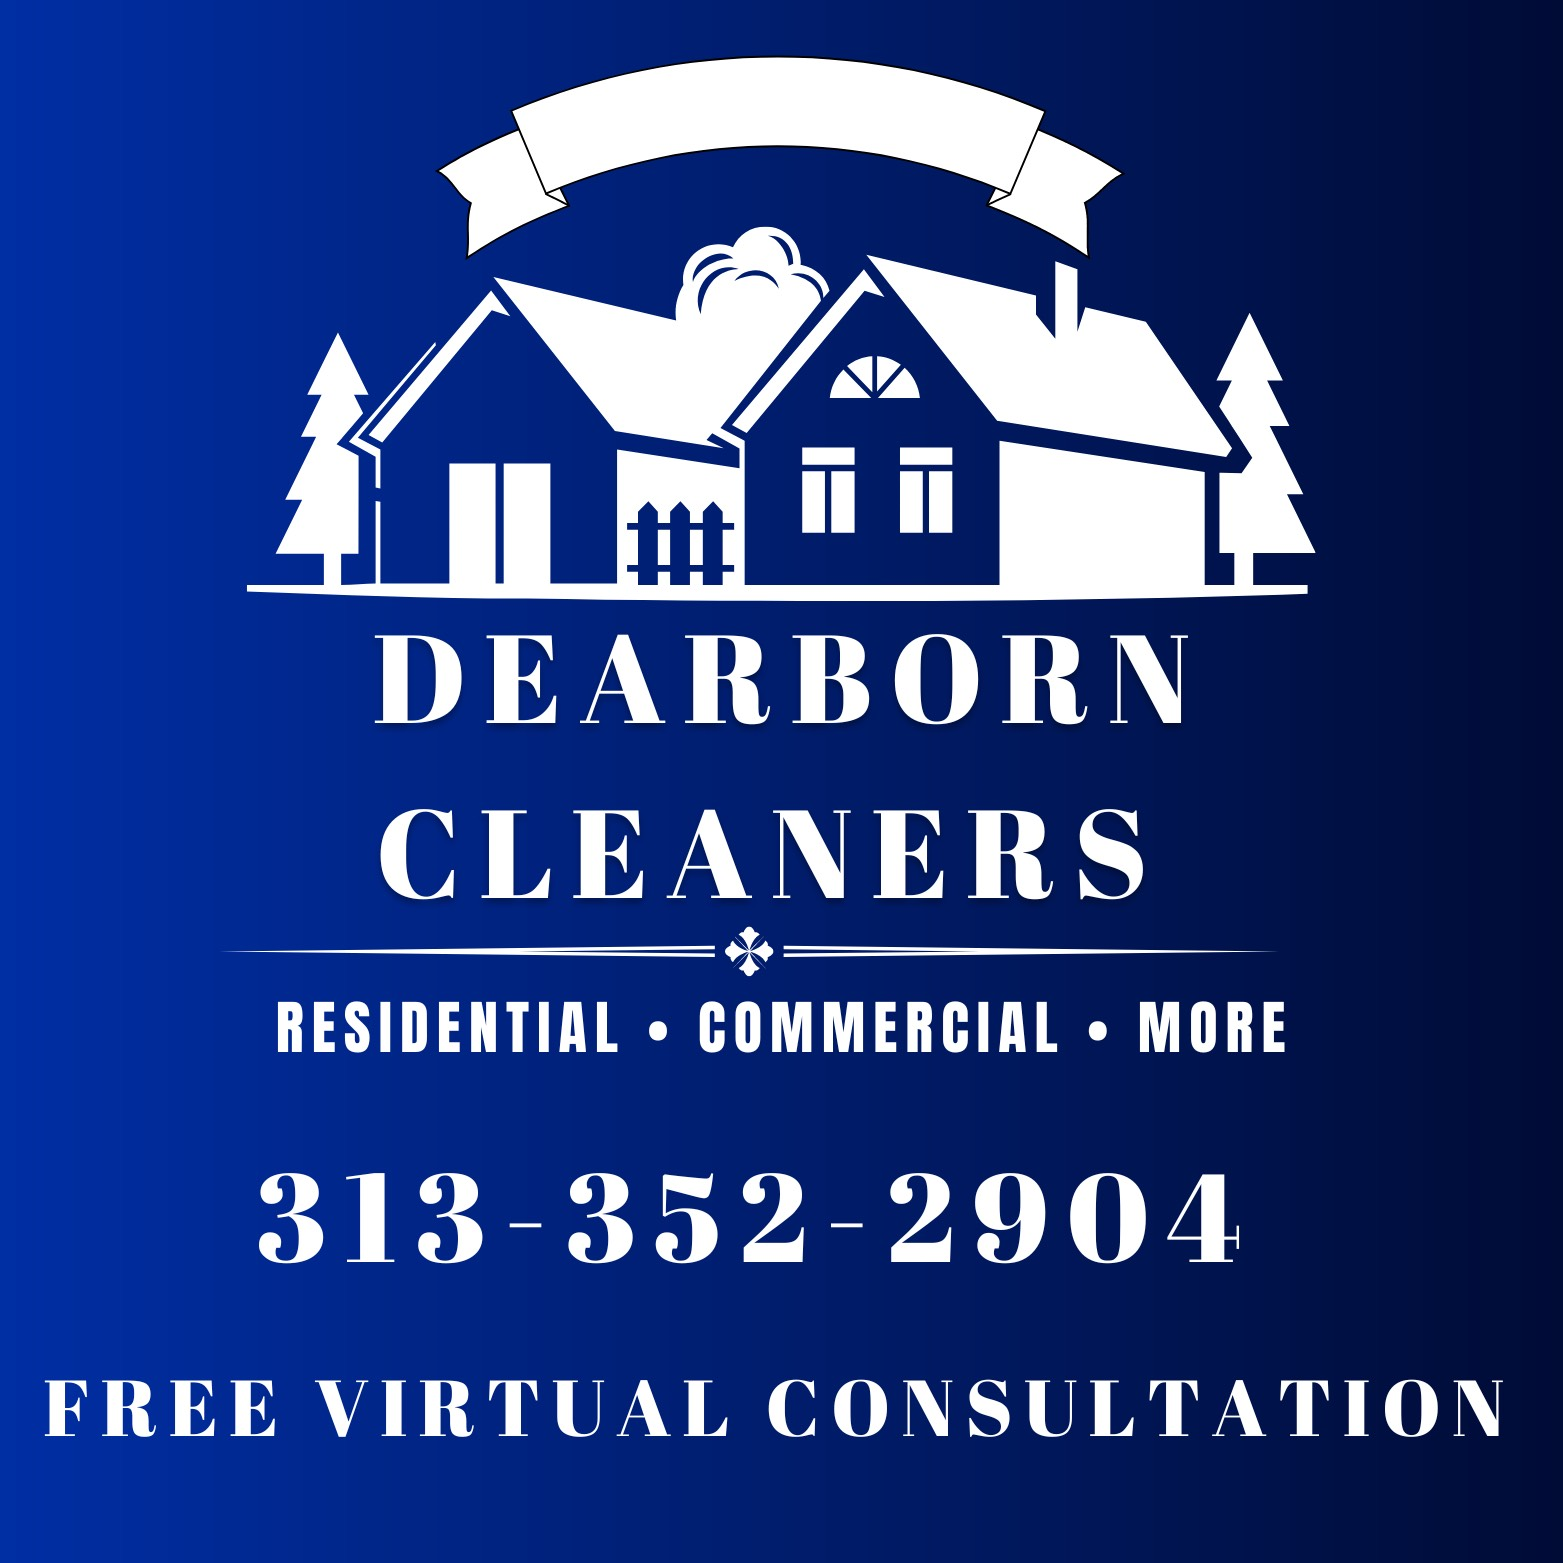 Dearborn Cleaners